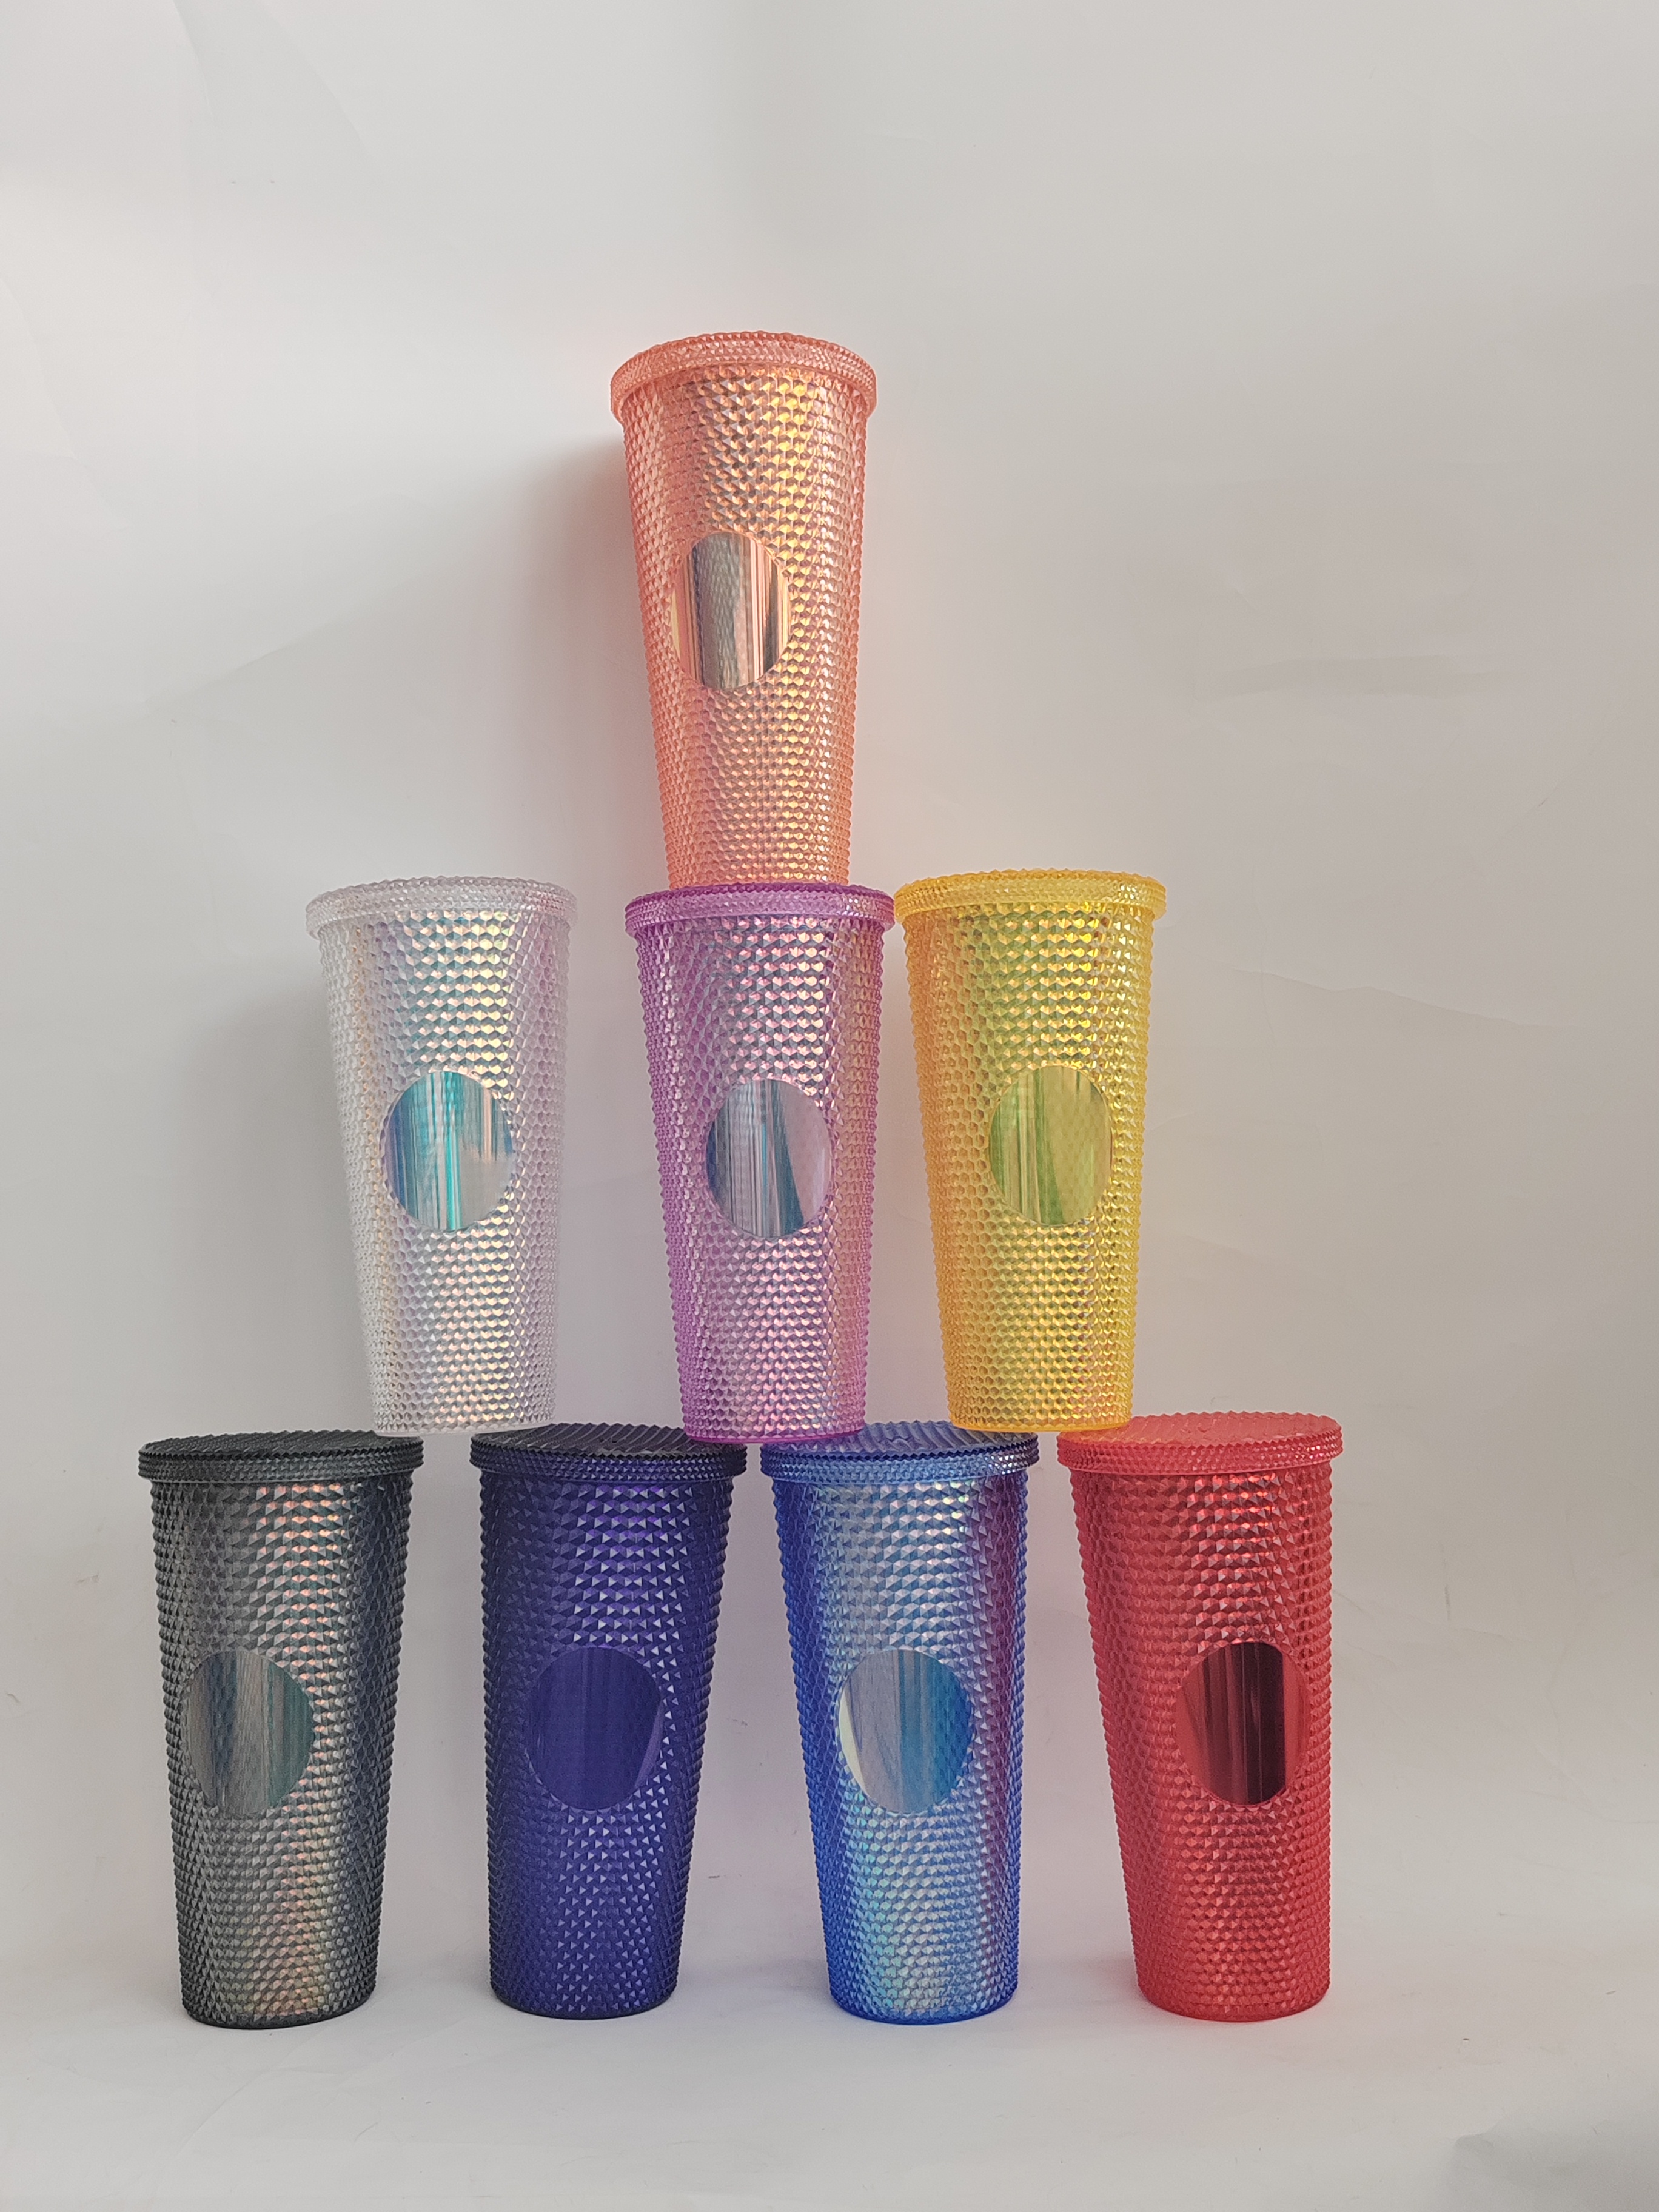 Introducing YS2352 – Safe and Stylish Plastic Cup!